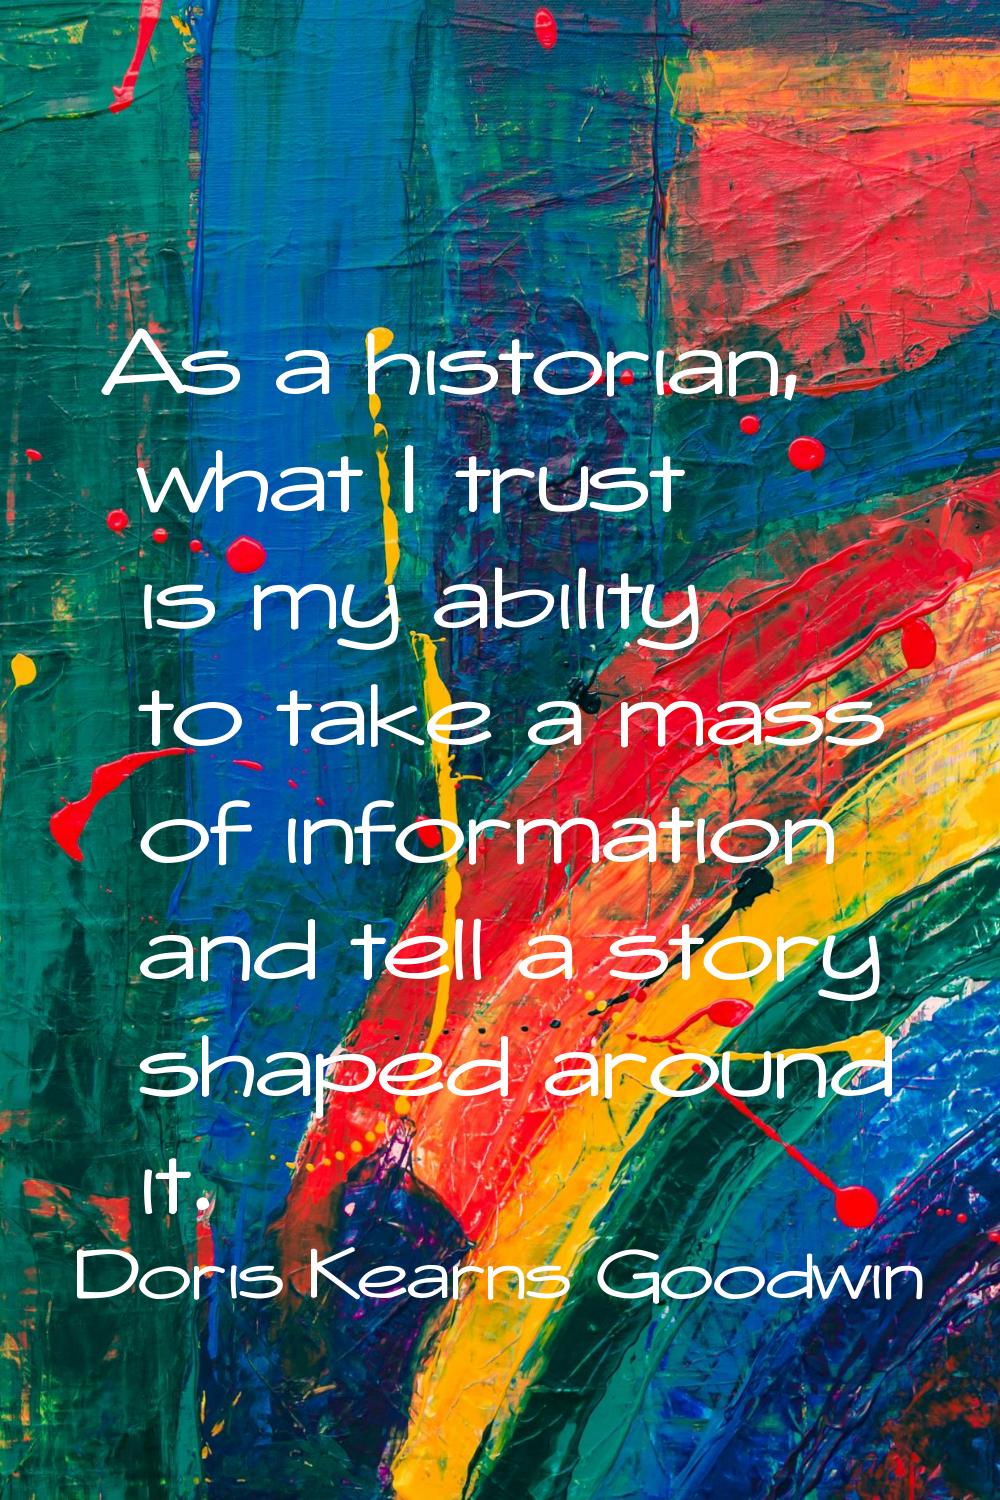 As a historian, what I trust is my ability to take a mass of information and tell a story shaped ar